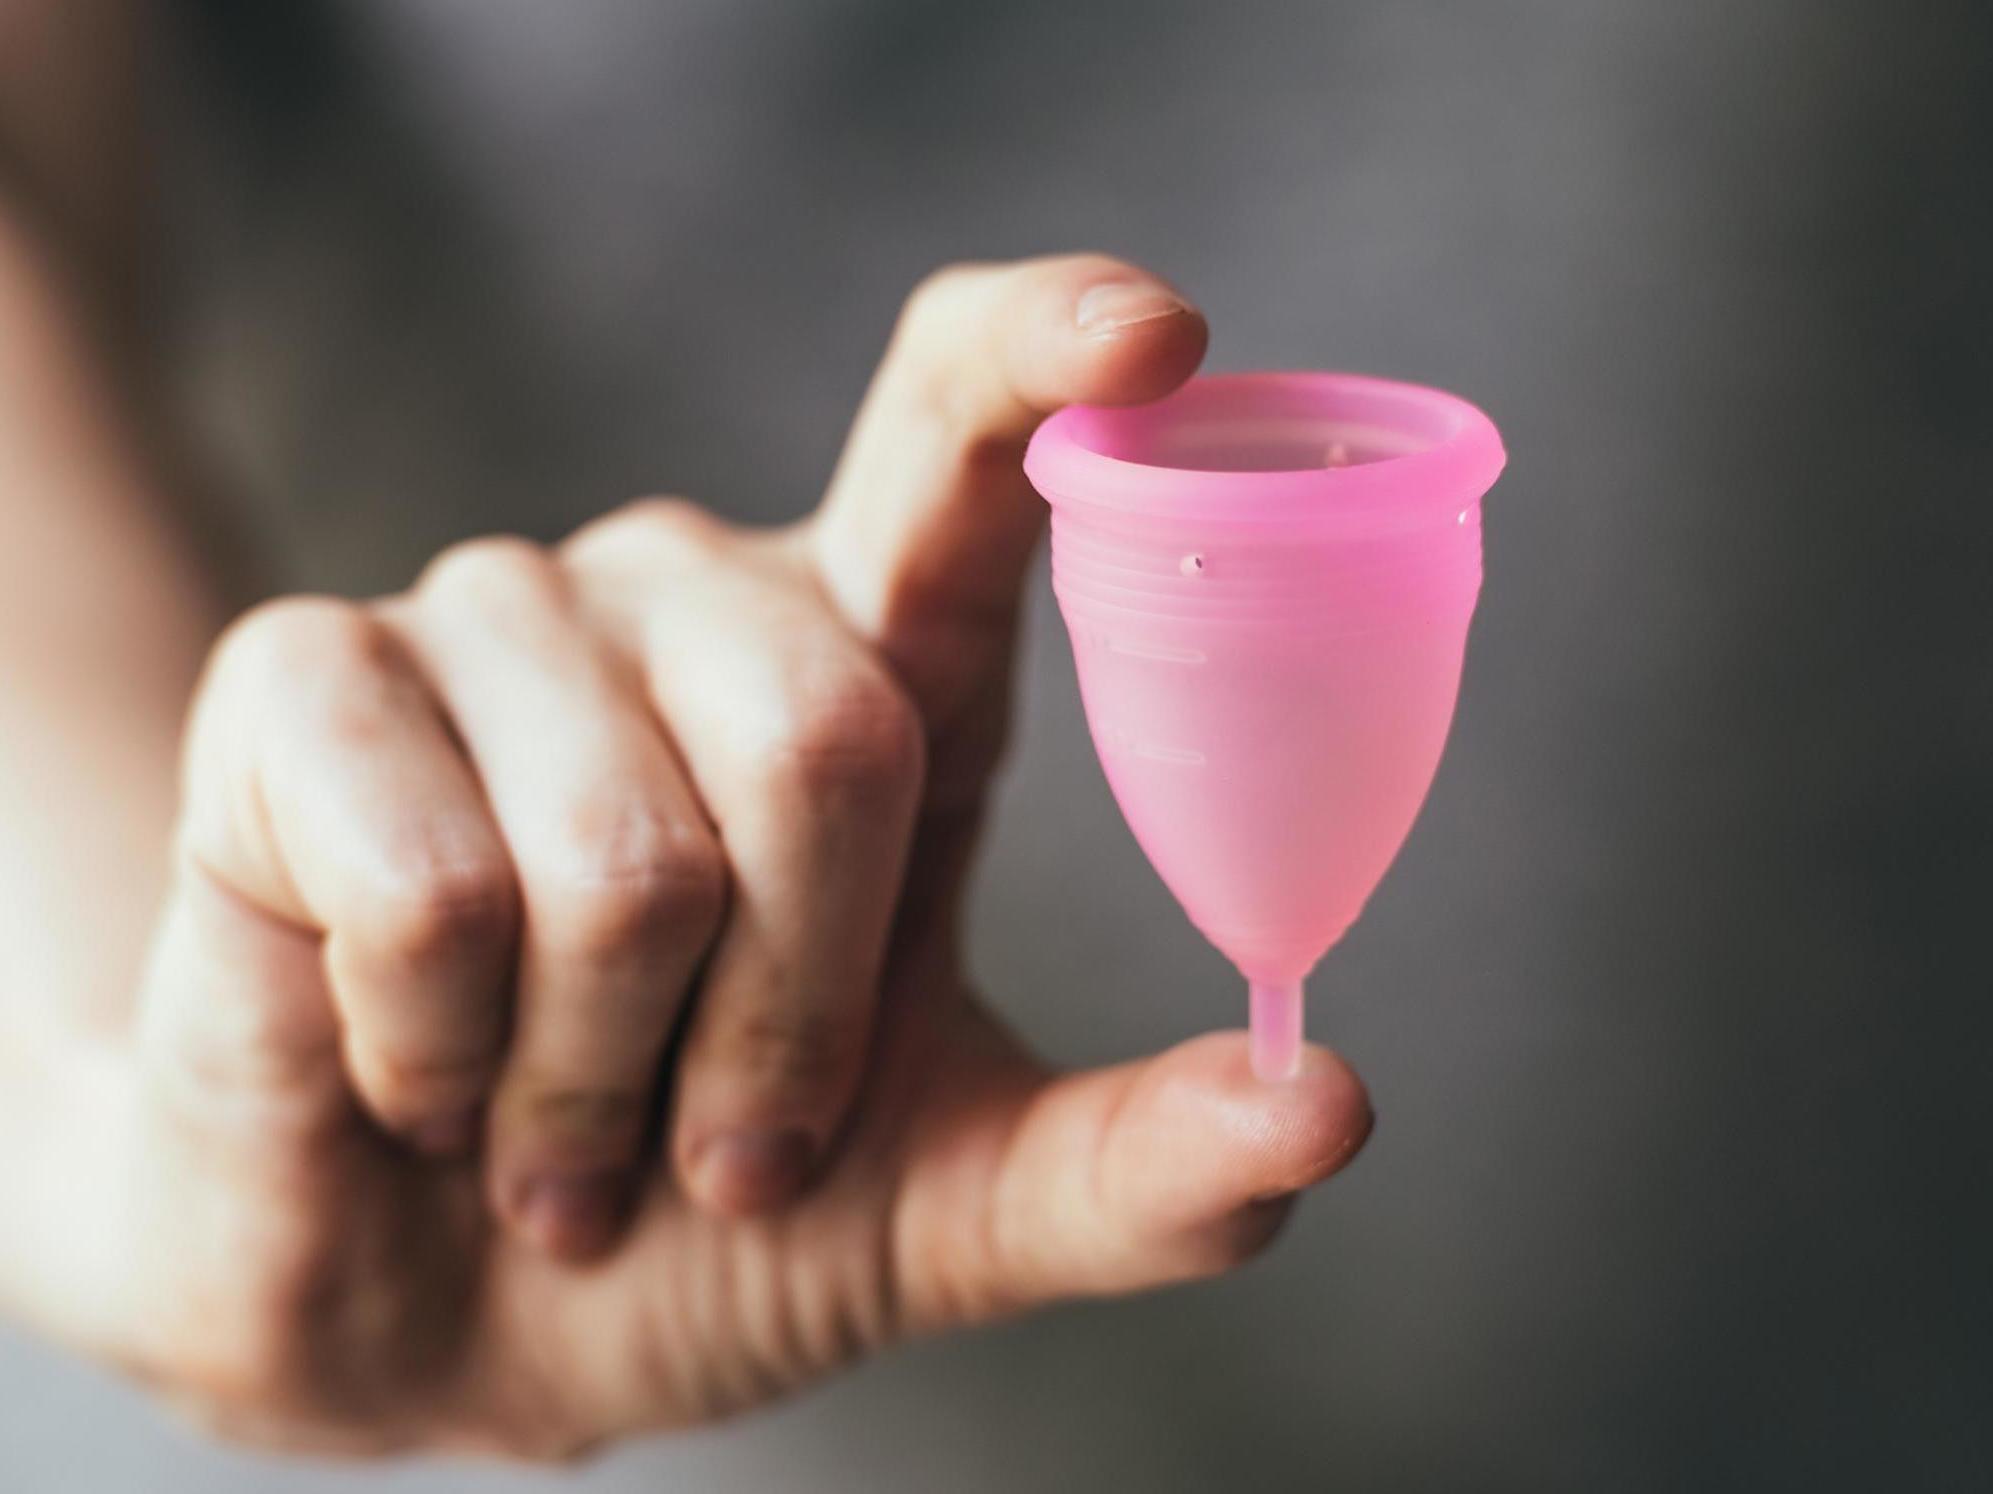 Cups are made from medical grade silicone and have a similar shape